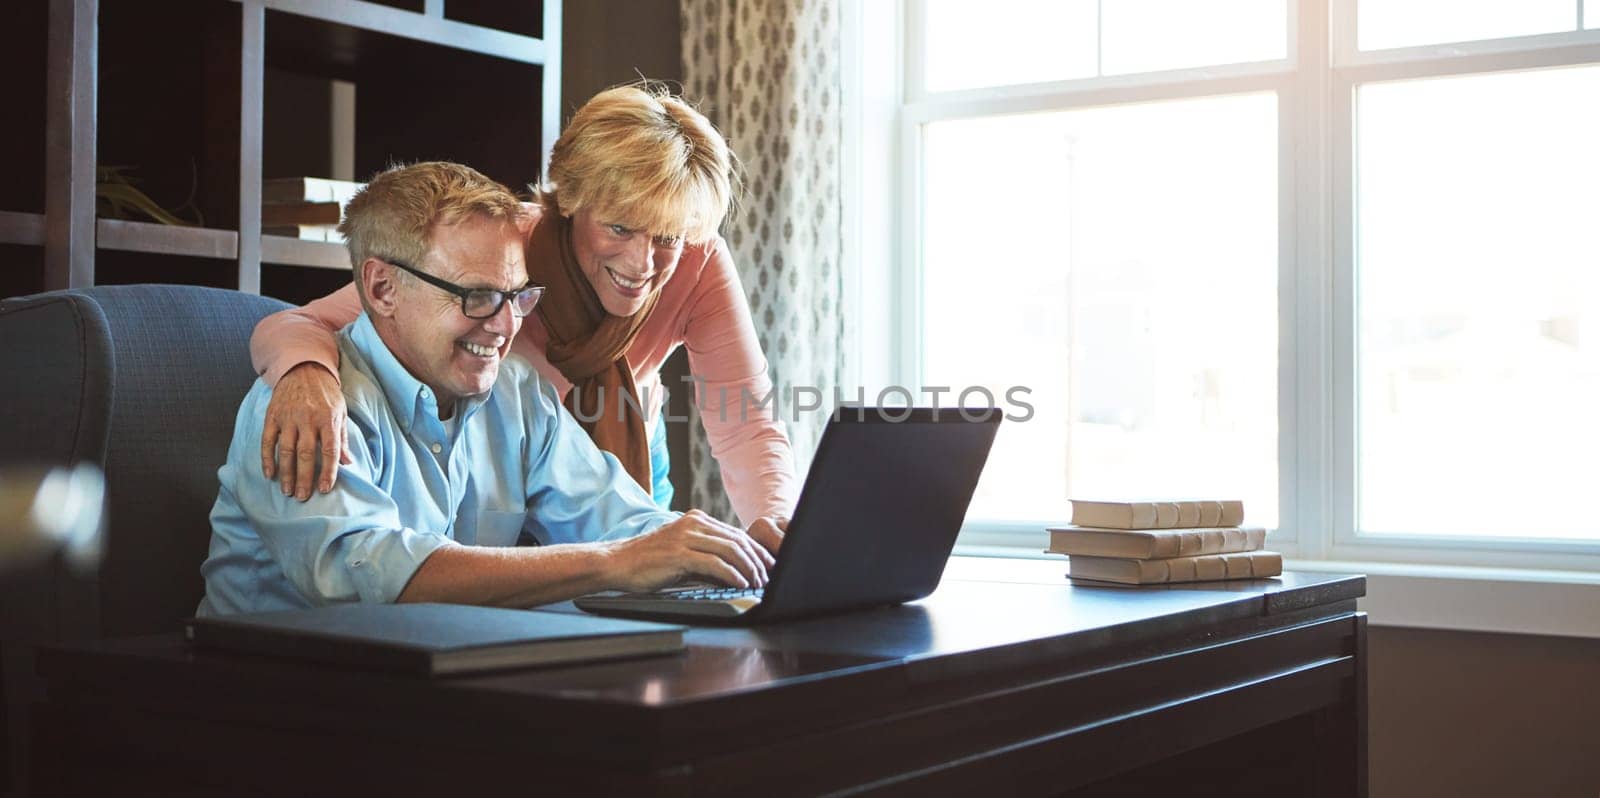 We have more than enough money for retirement. a mature woman keeping her husband company while he works from home. by YuriArcurs